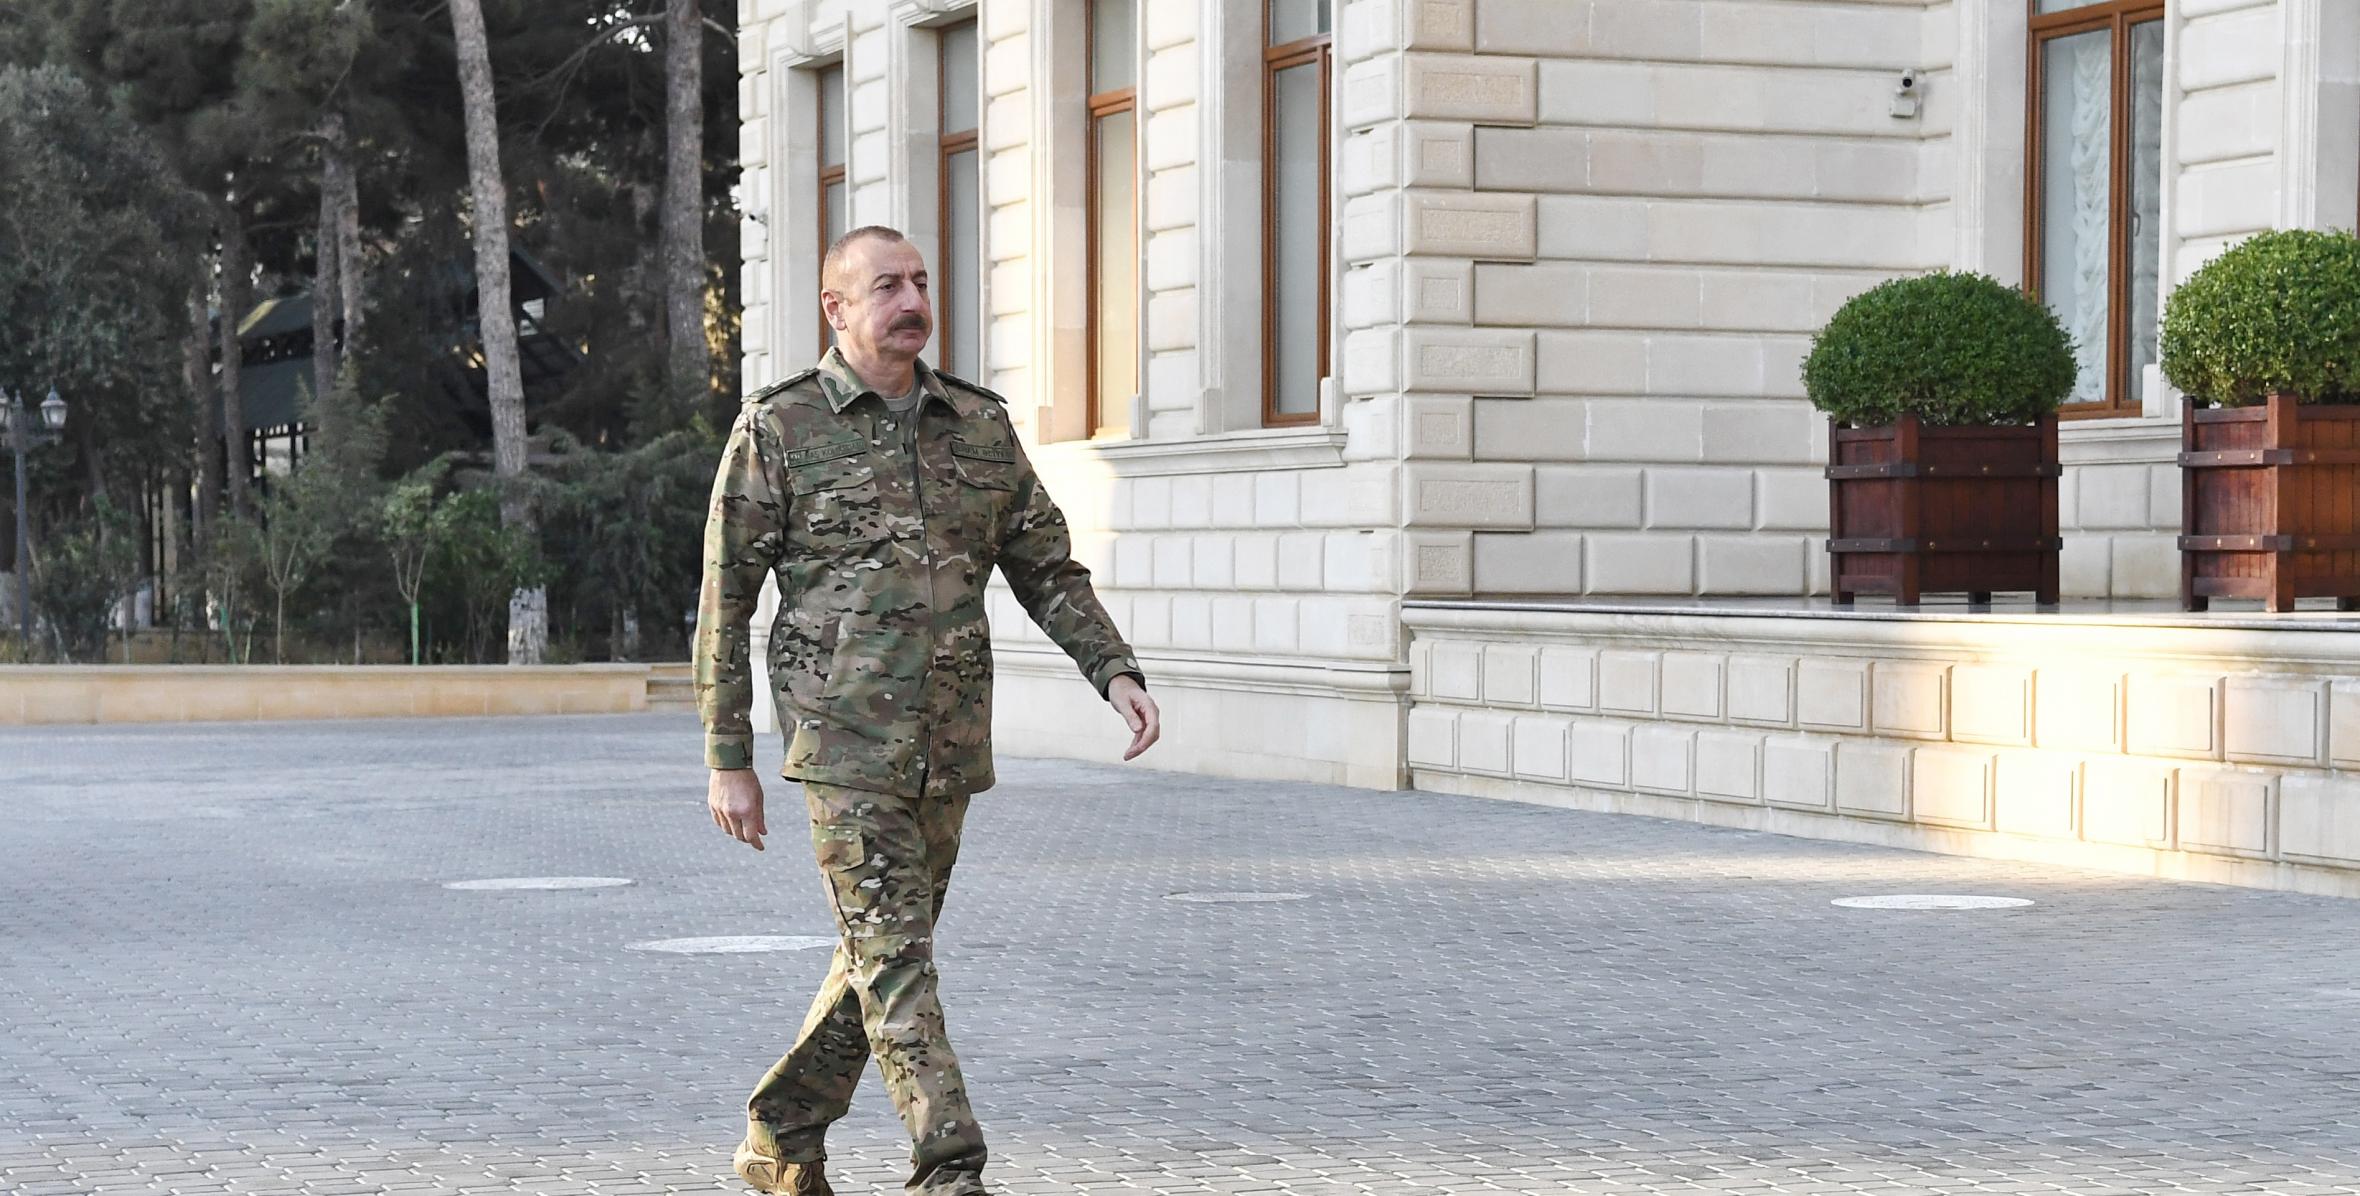 The operational meeting was held under President, Commander-in-Chief Ilham Aliyev at Central Command Post of Ministry of Defense